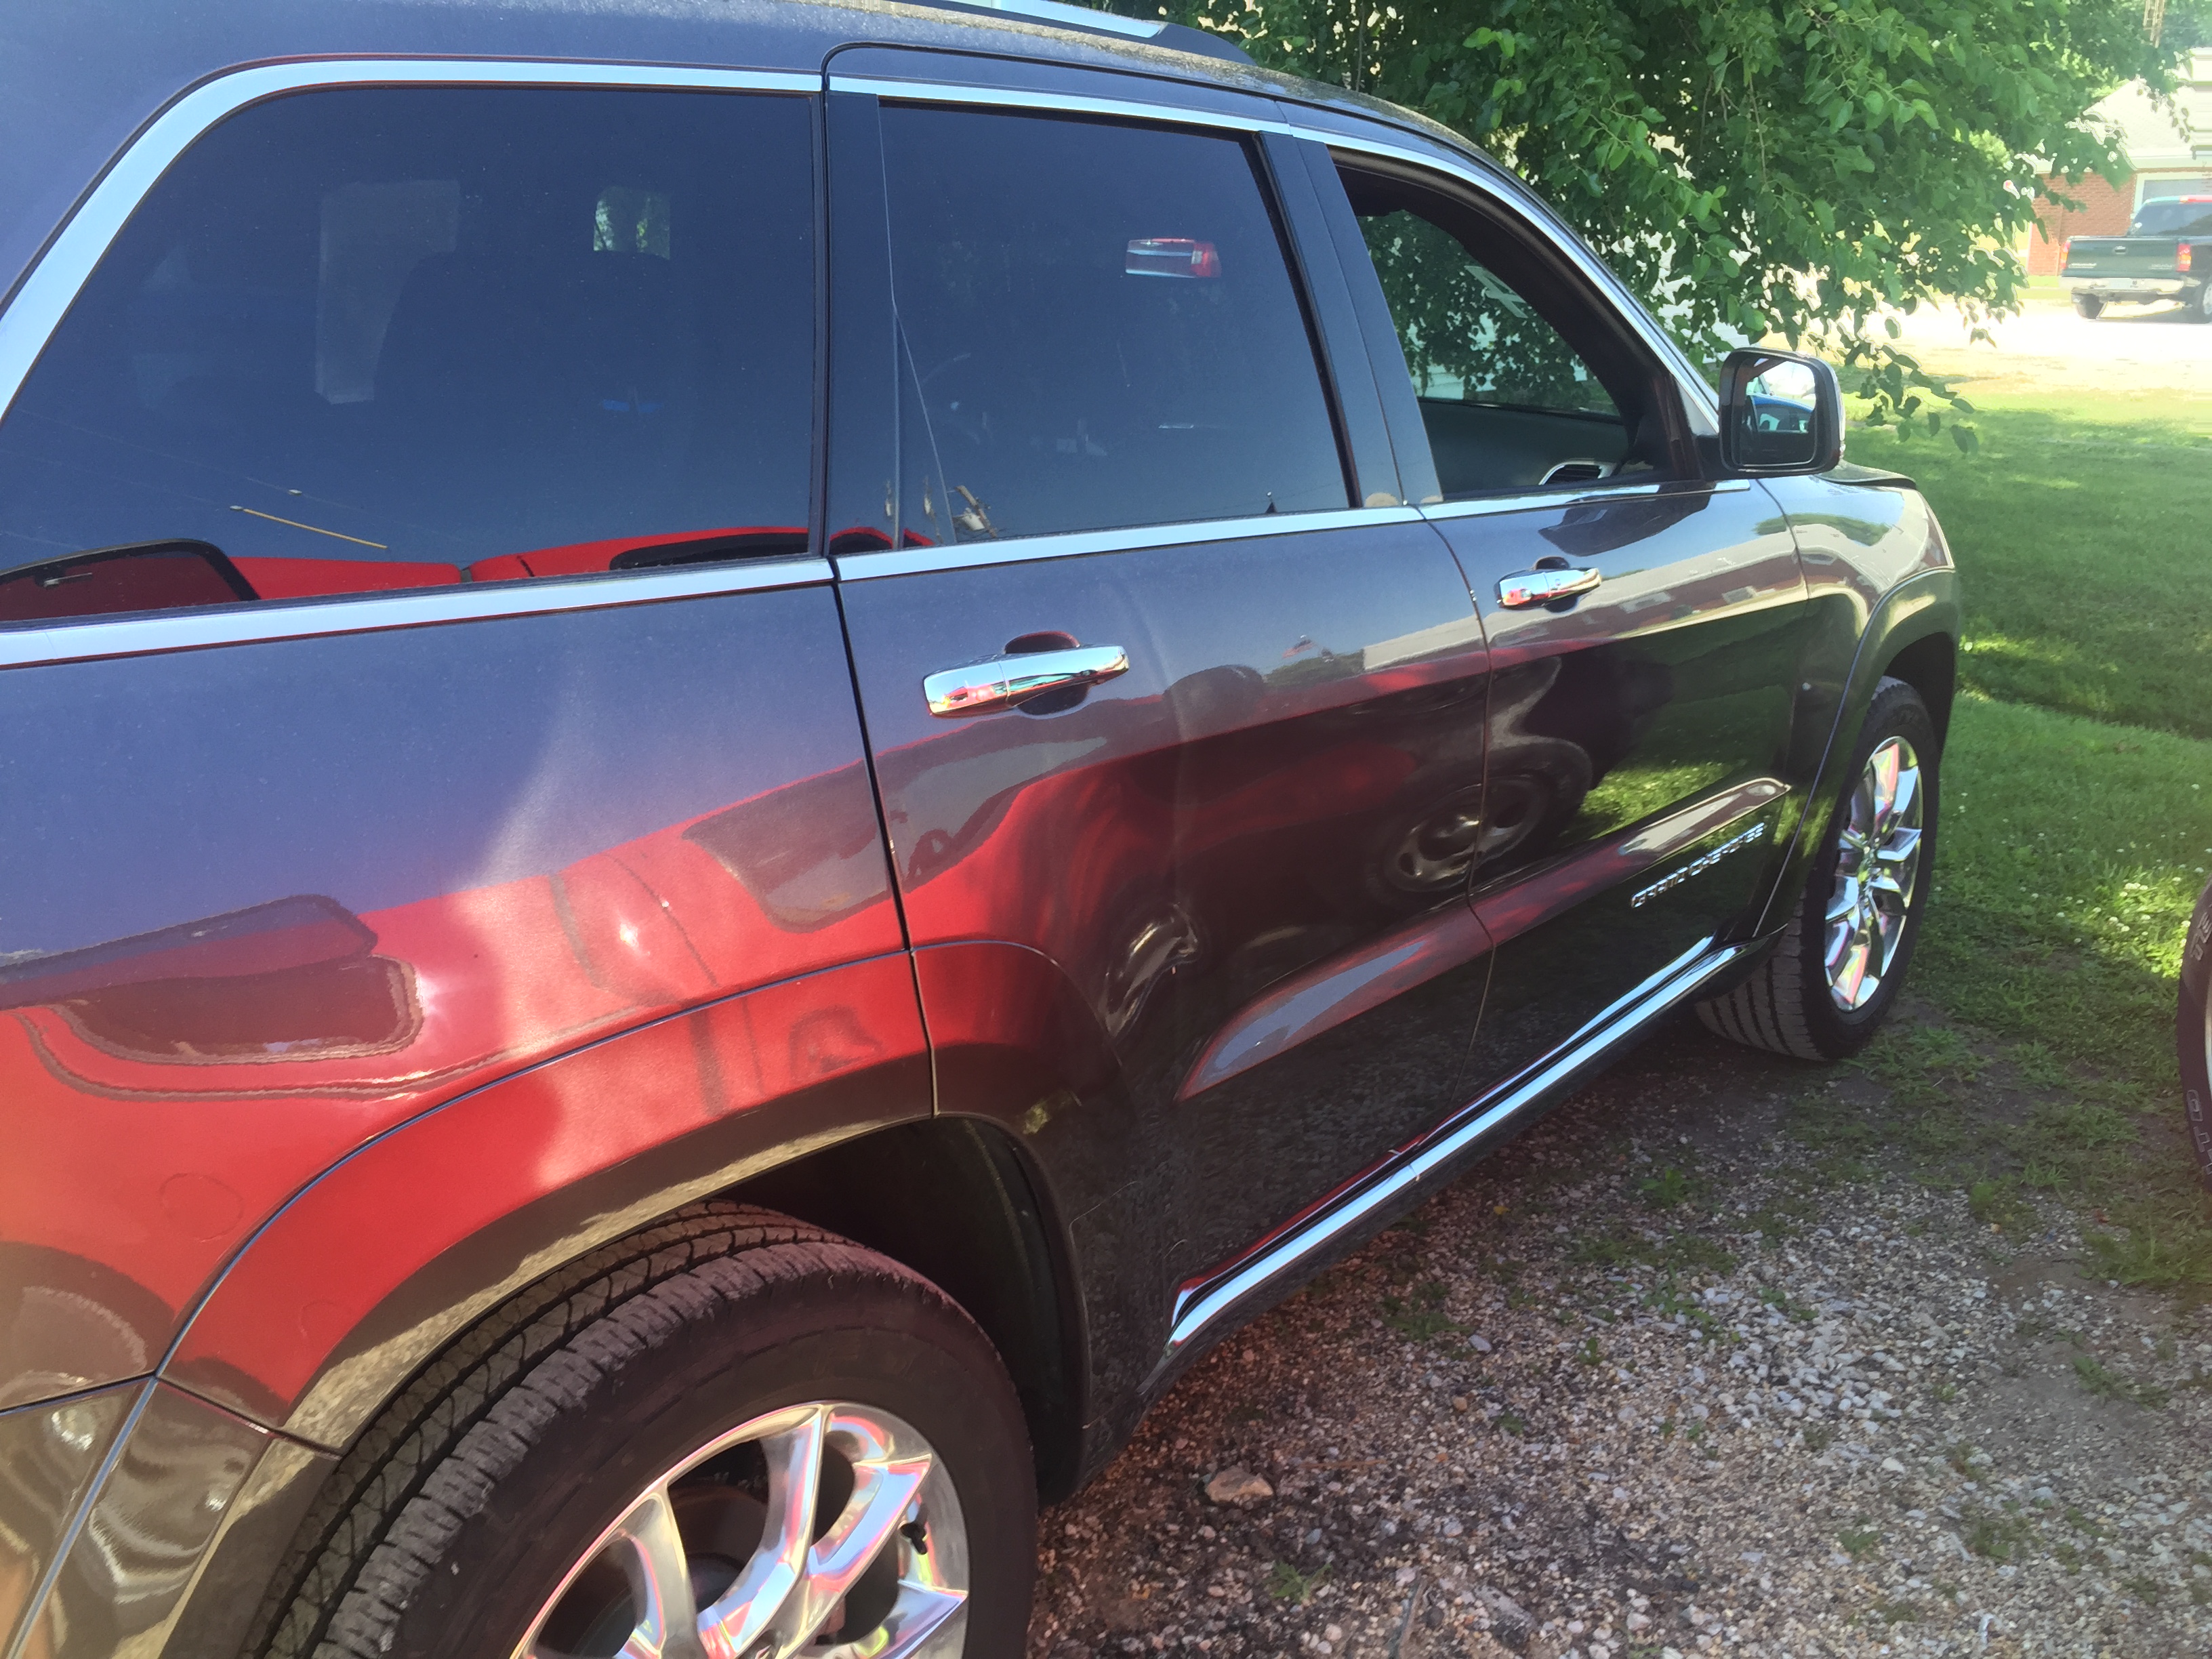 2014 Grand Cherokee Dent Repair on Hood, by Michael Bocek out of Springfield, IL http://217dent.com